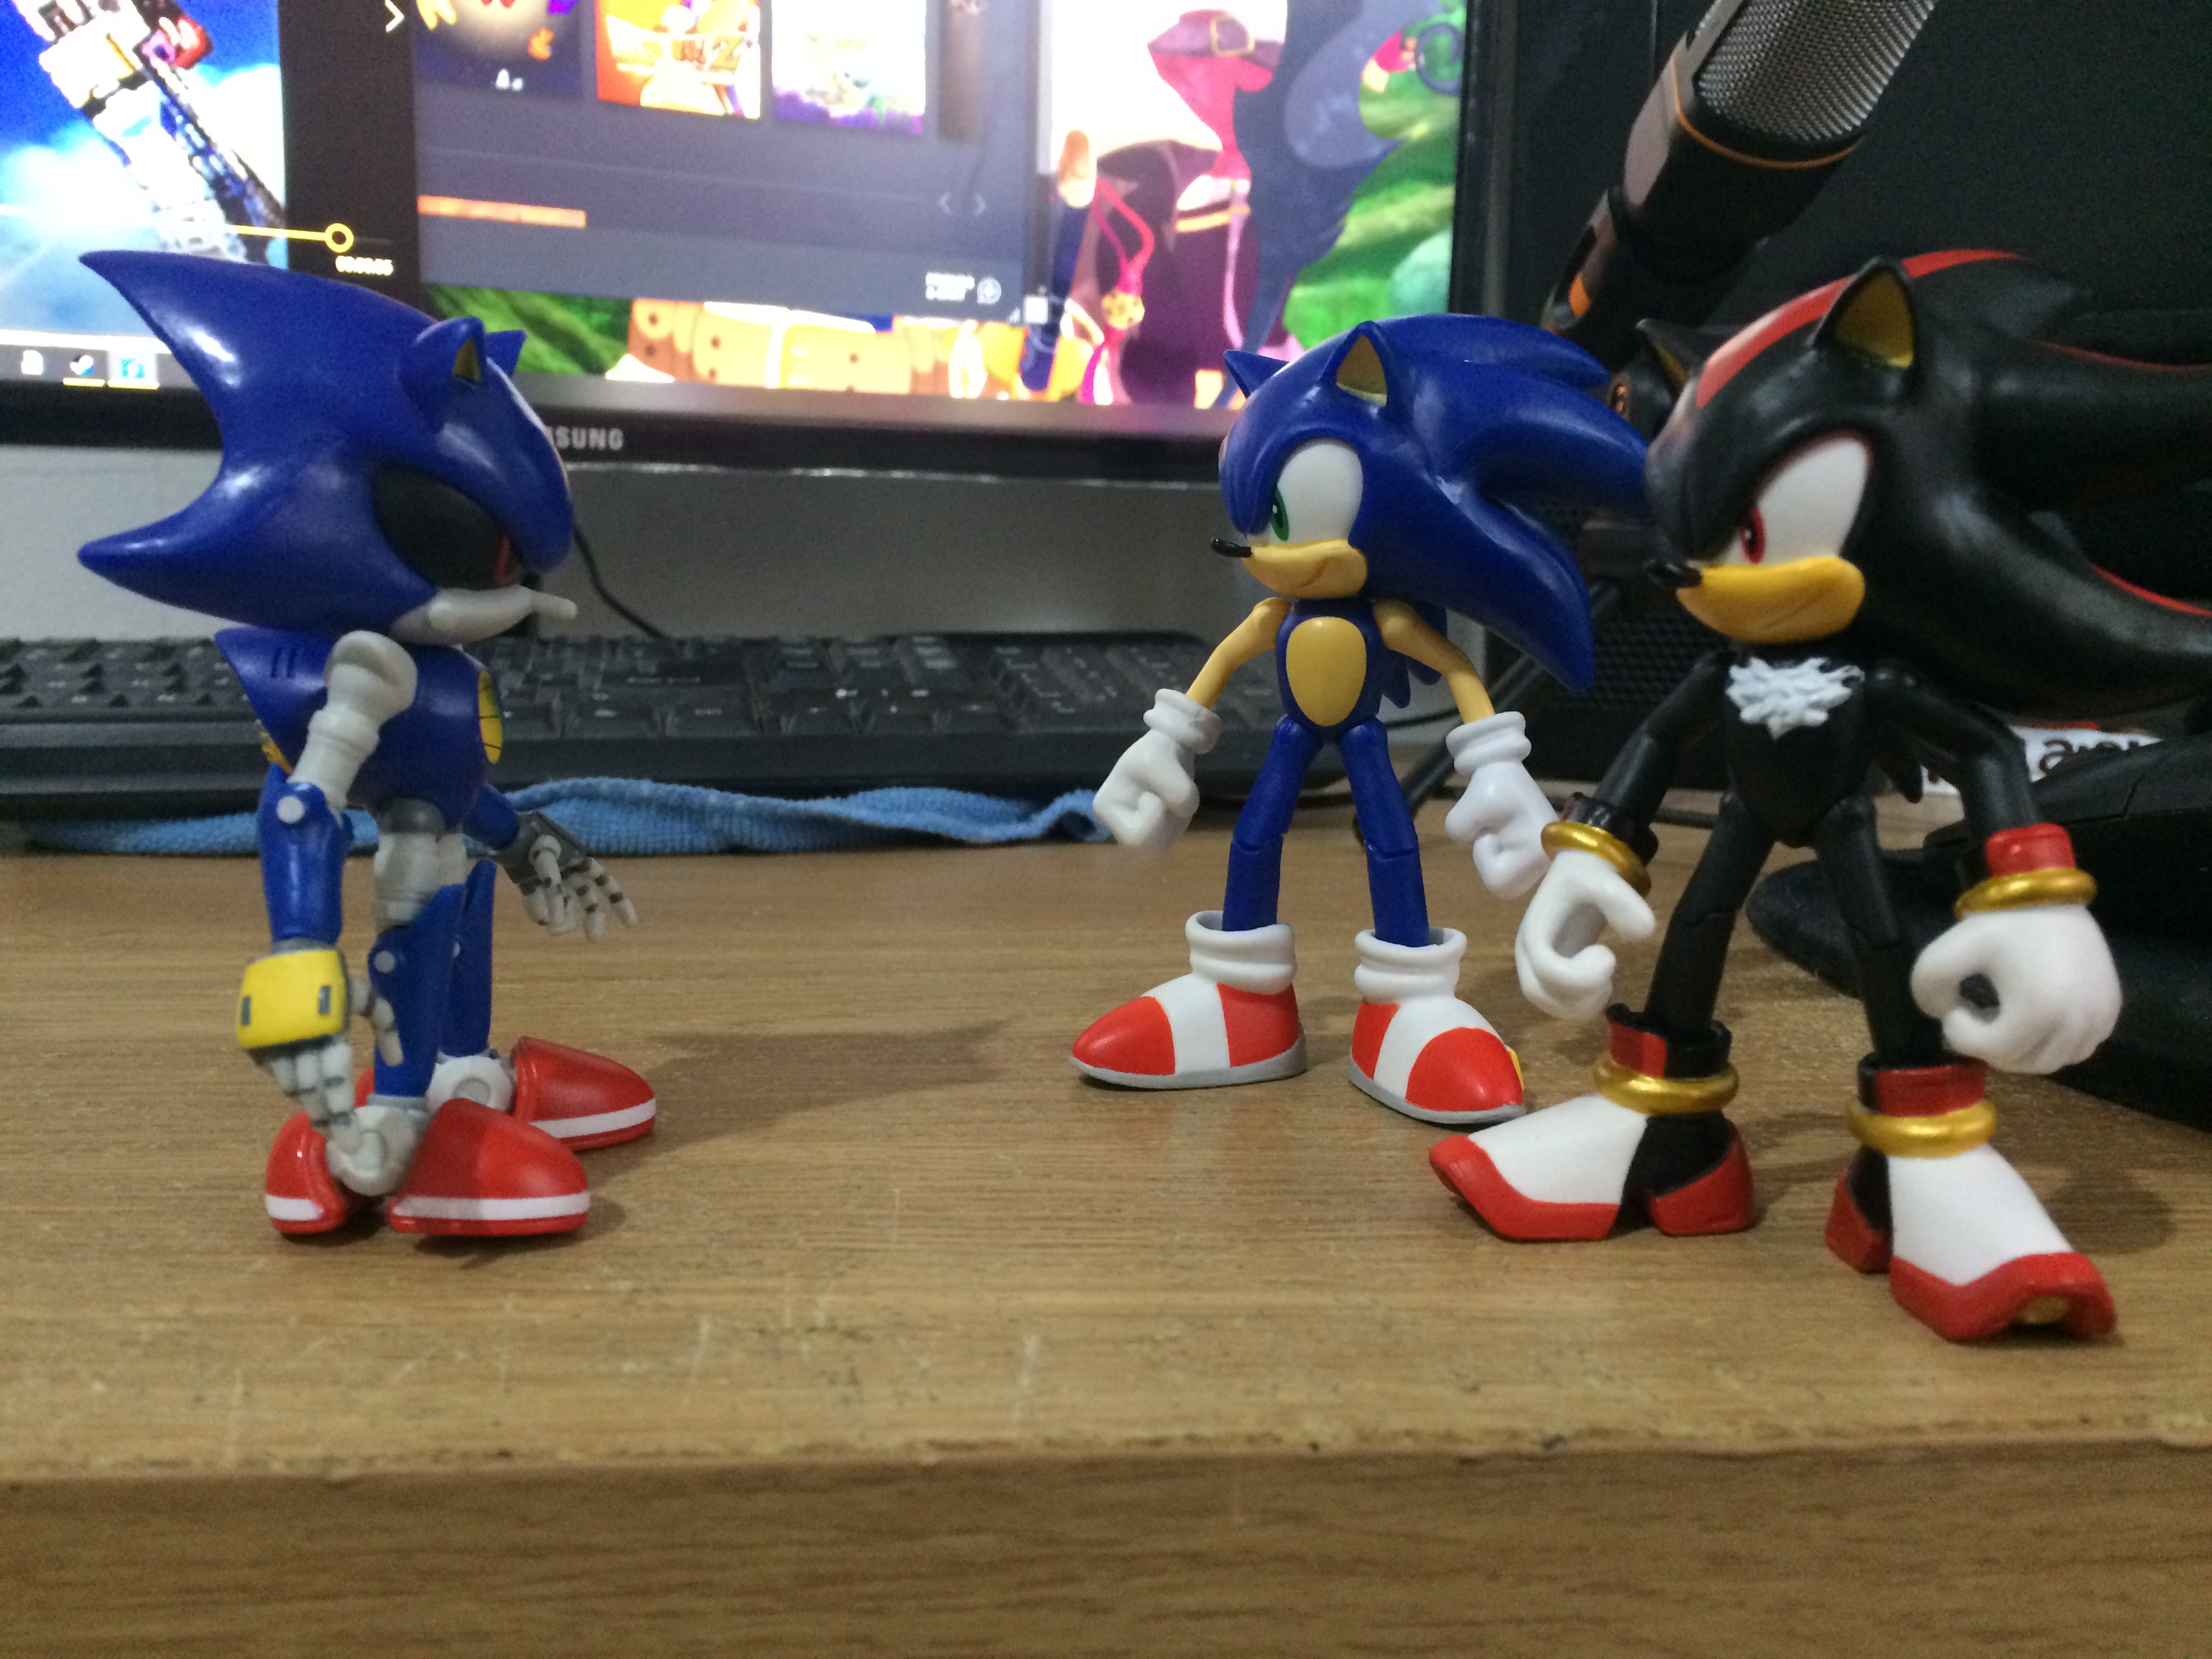 sonic and shadow vs Metal sonic from sonic boom